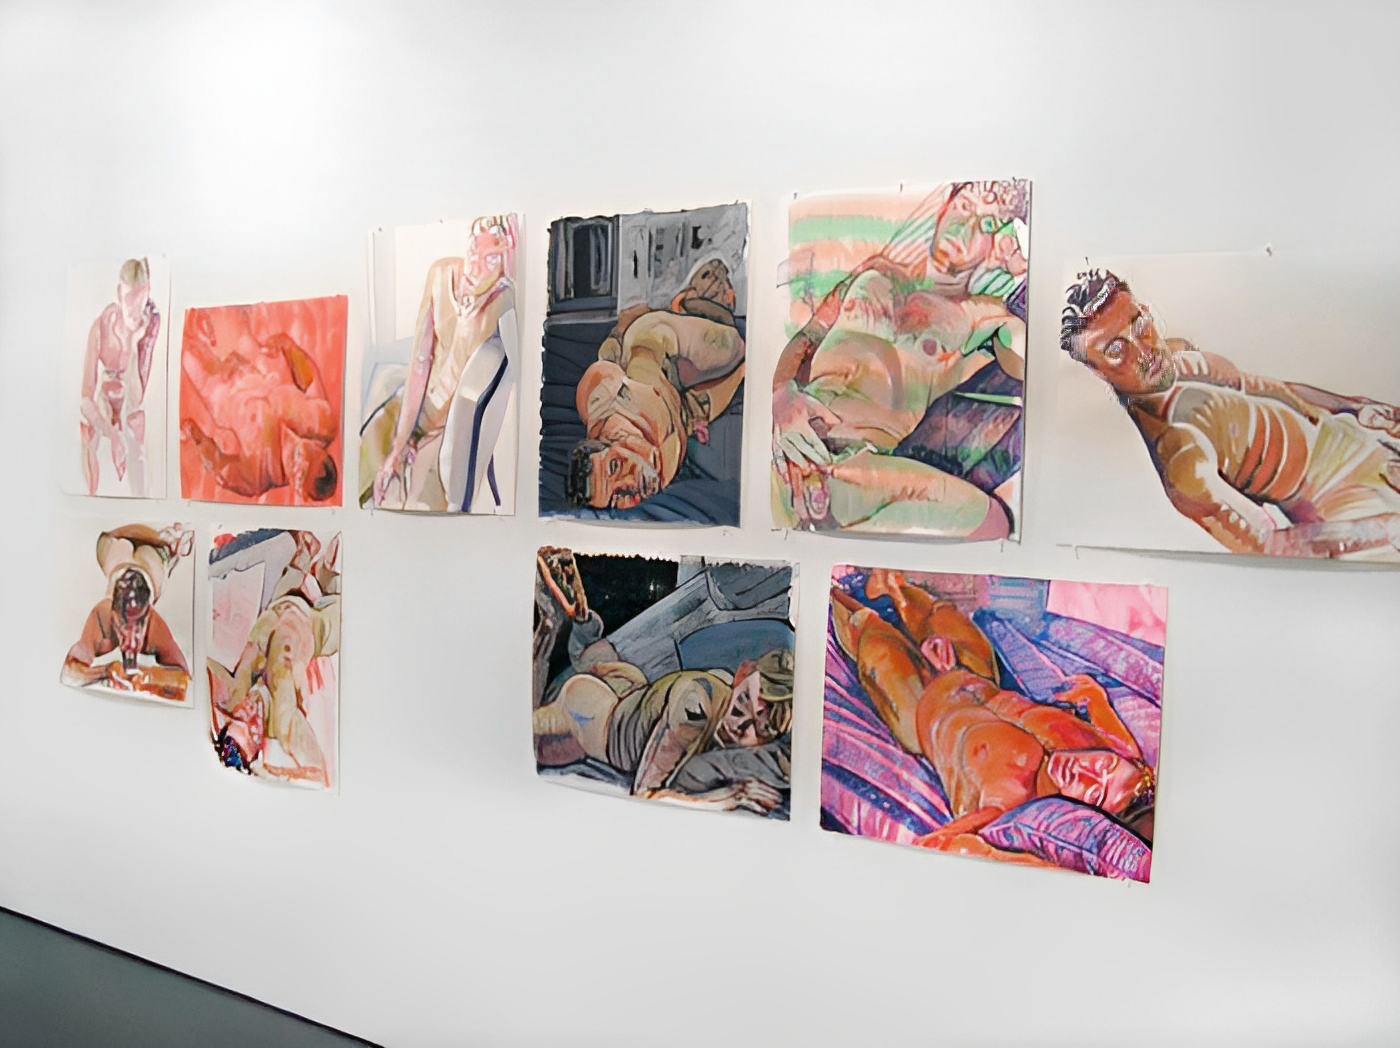   This exhibition, jointly organized with Matthew Higgs, was the first New York solo show in more than 30 years by the Los Angeles-based artist Don Bachardy. It included 30 recent drawings of male nudes, selected from the many hundreds Bachardy has w